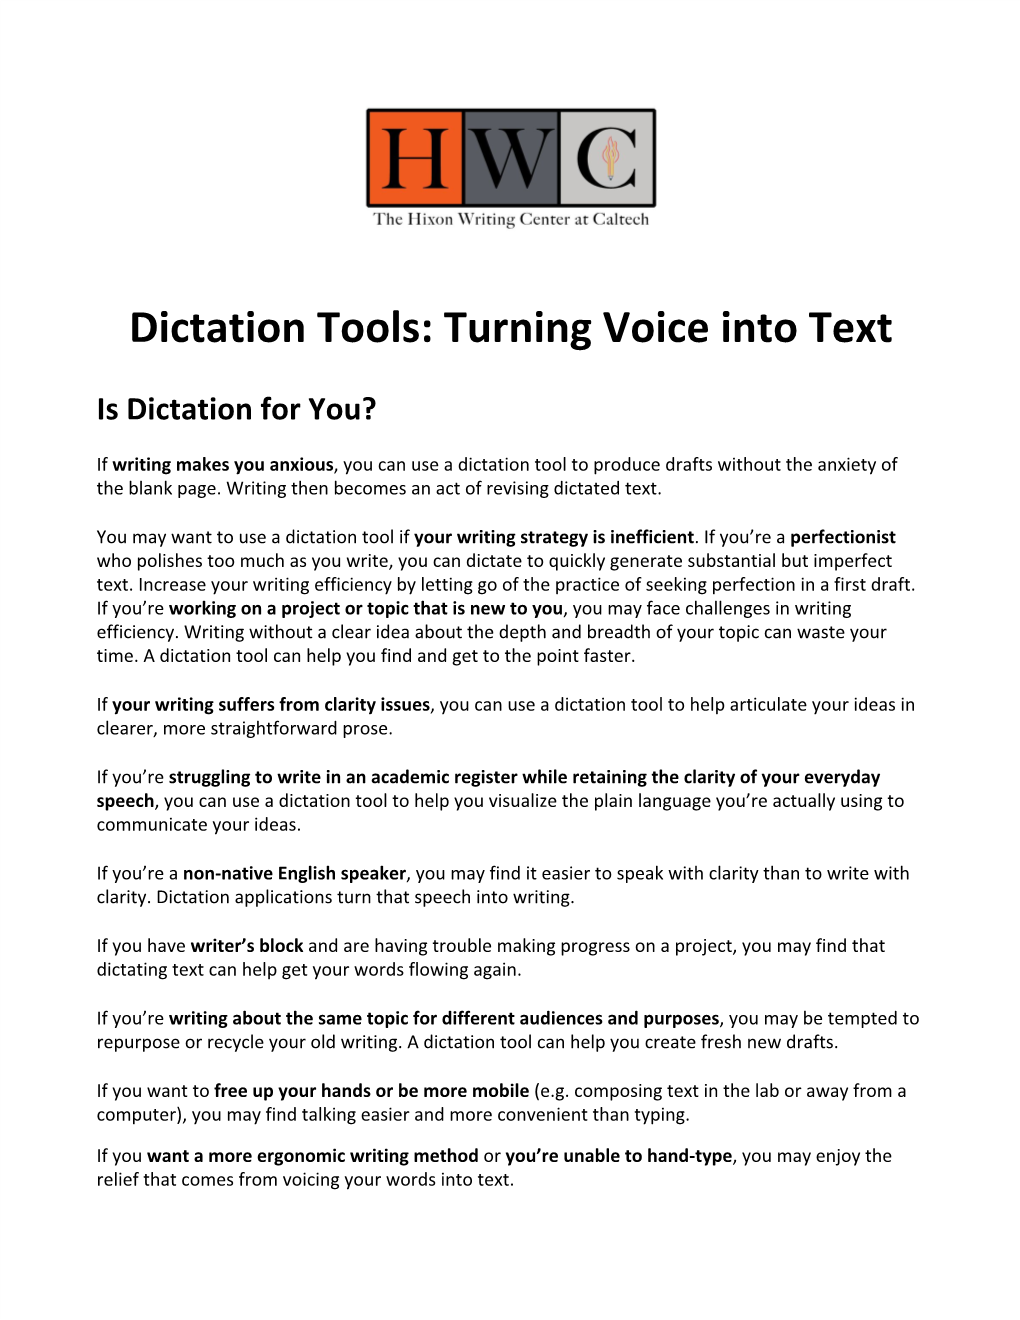 Dictation Tools: Turning Voice Into Text